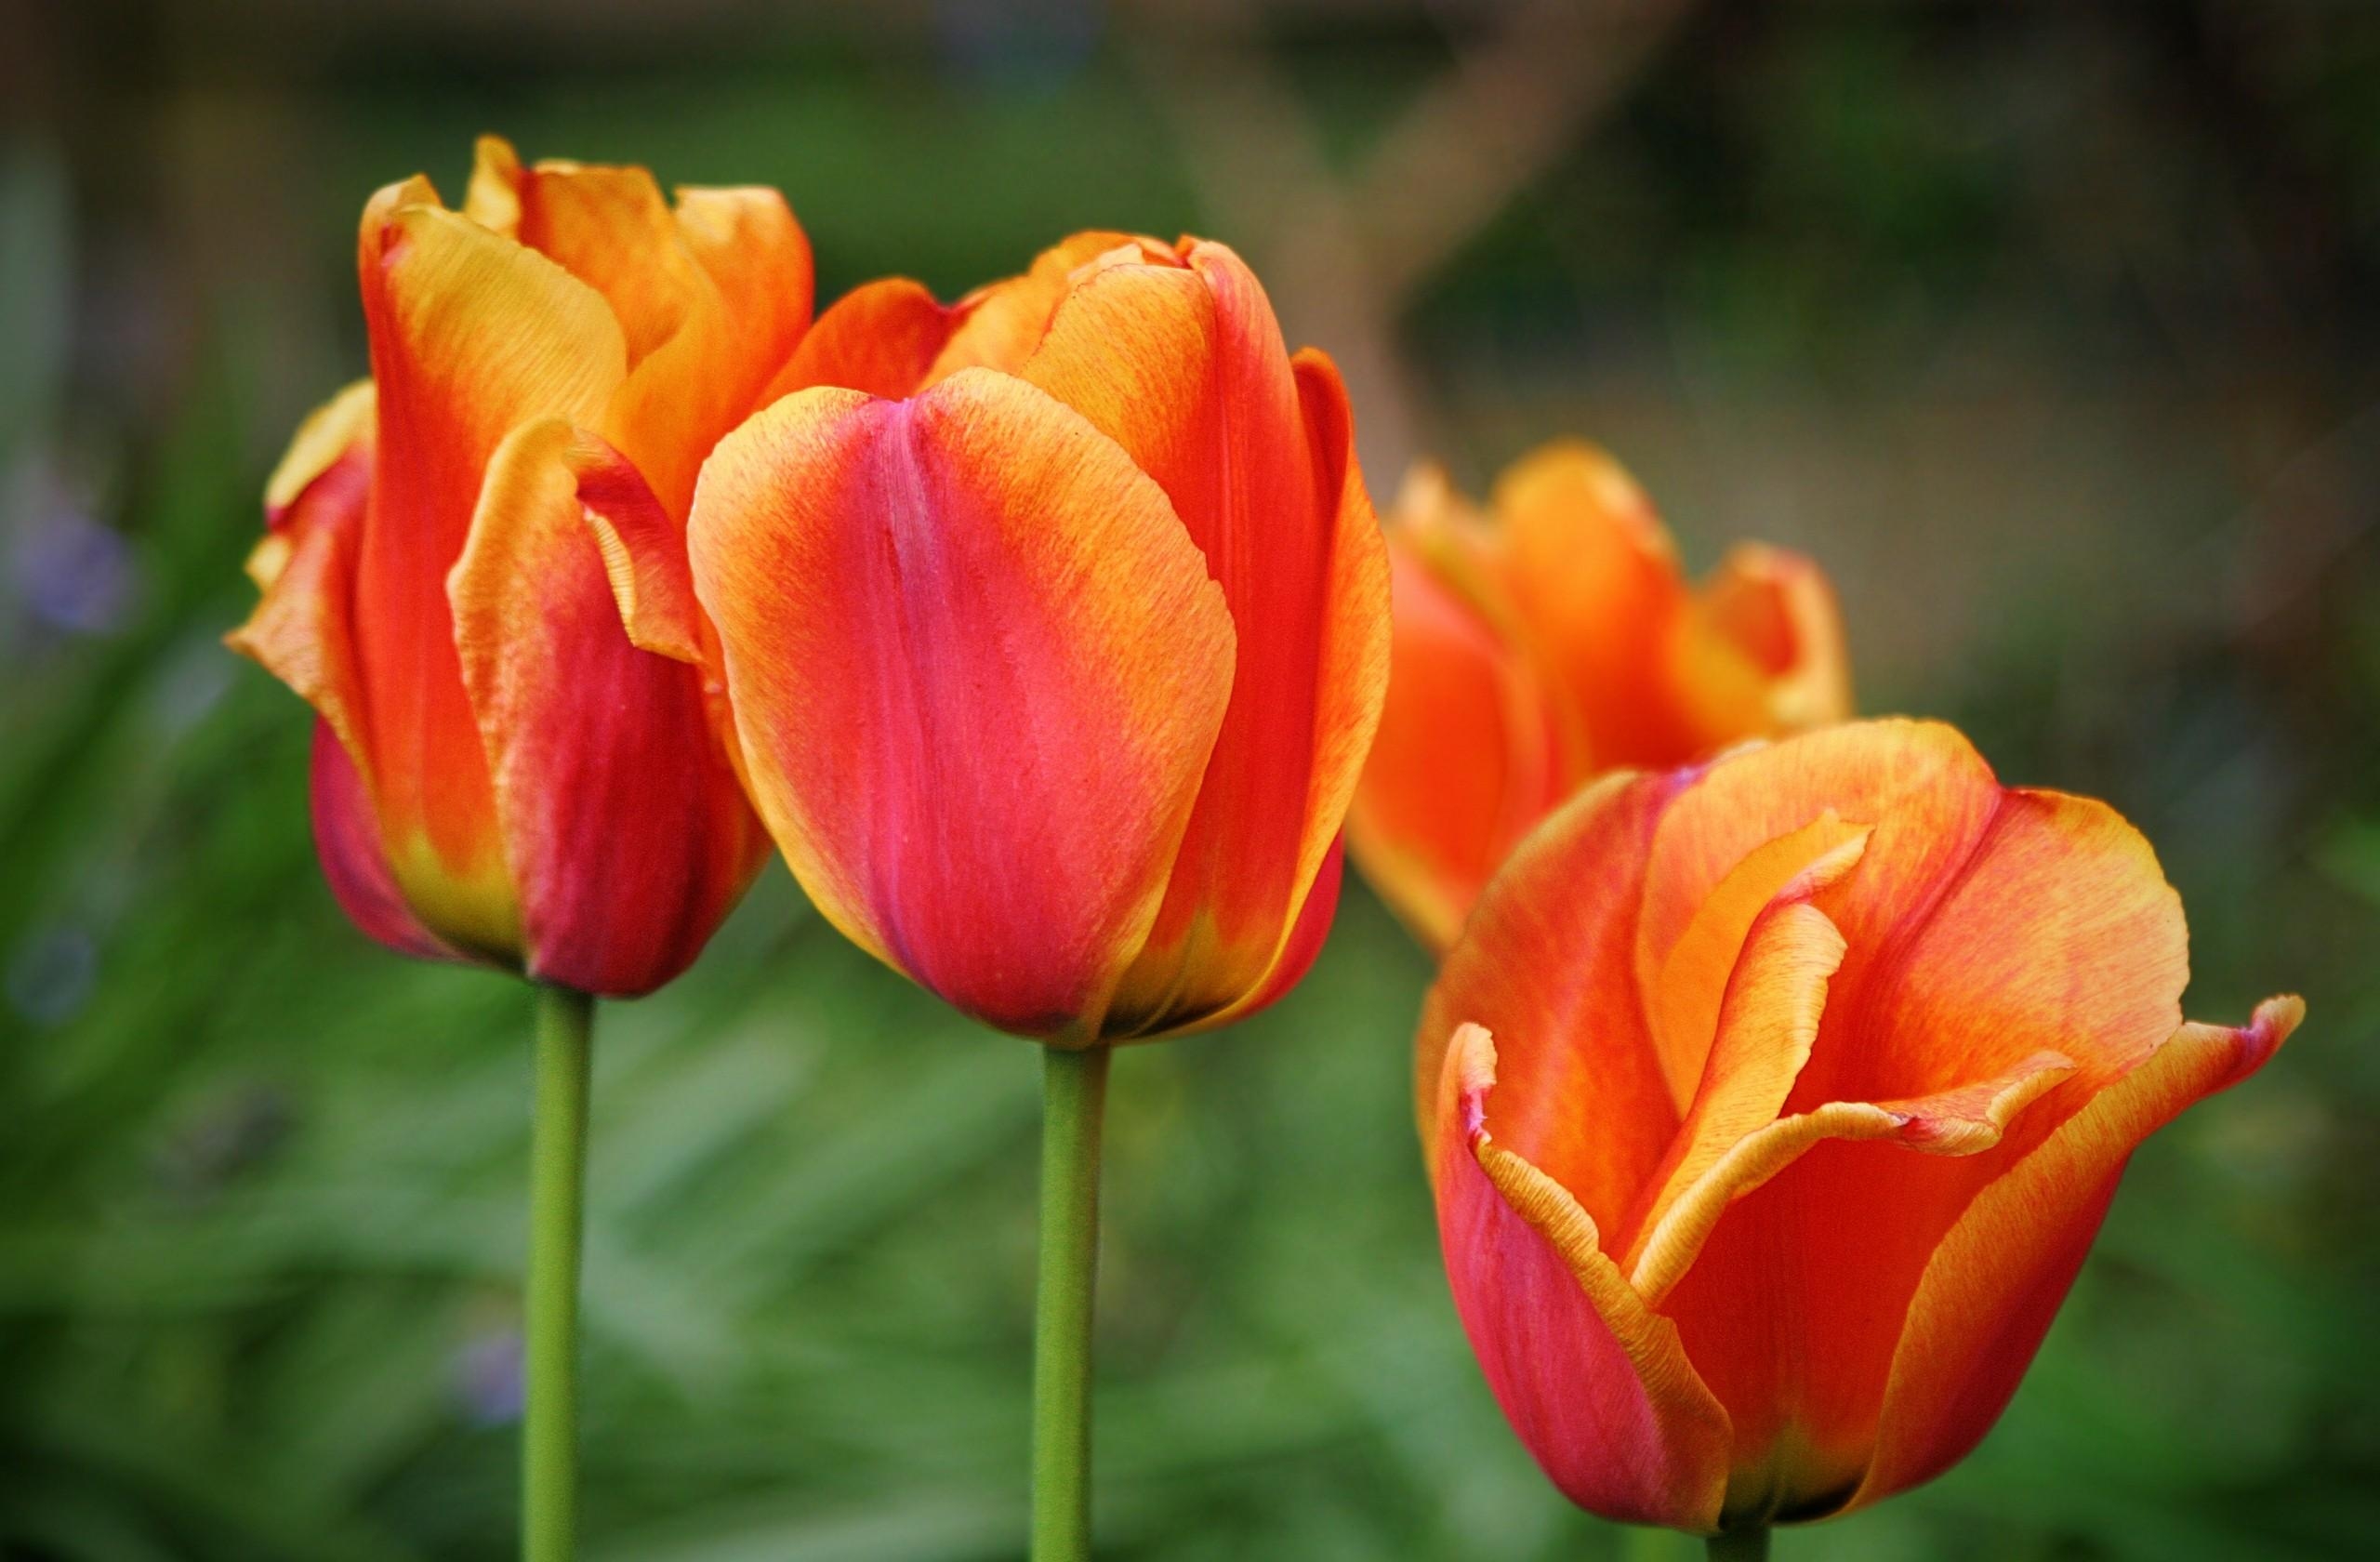 multicolored, flowers, tulips, blur, smooth, buds